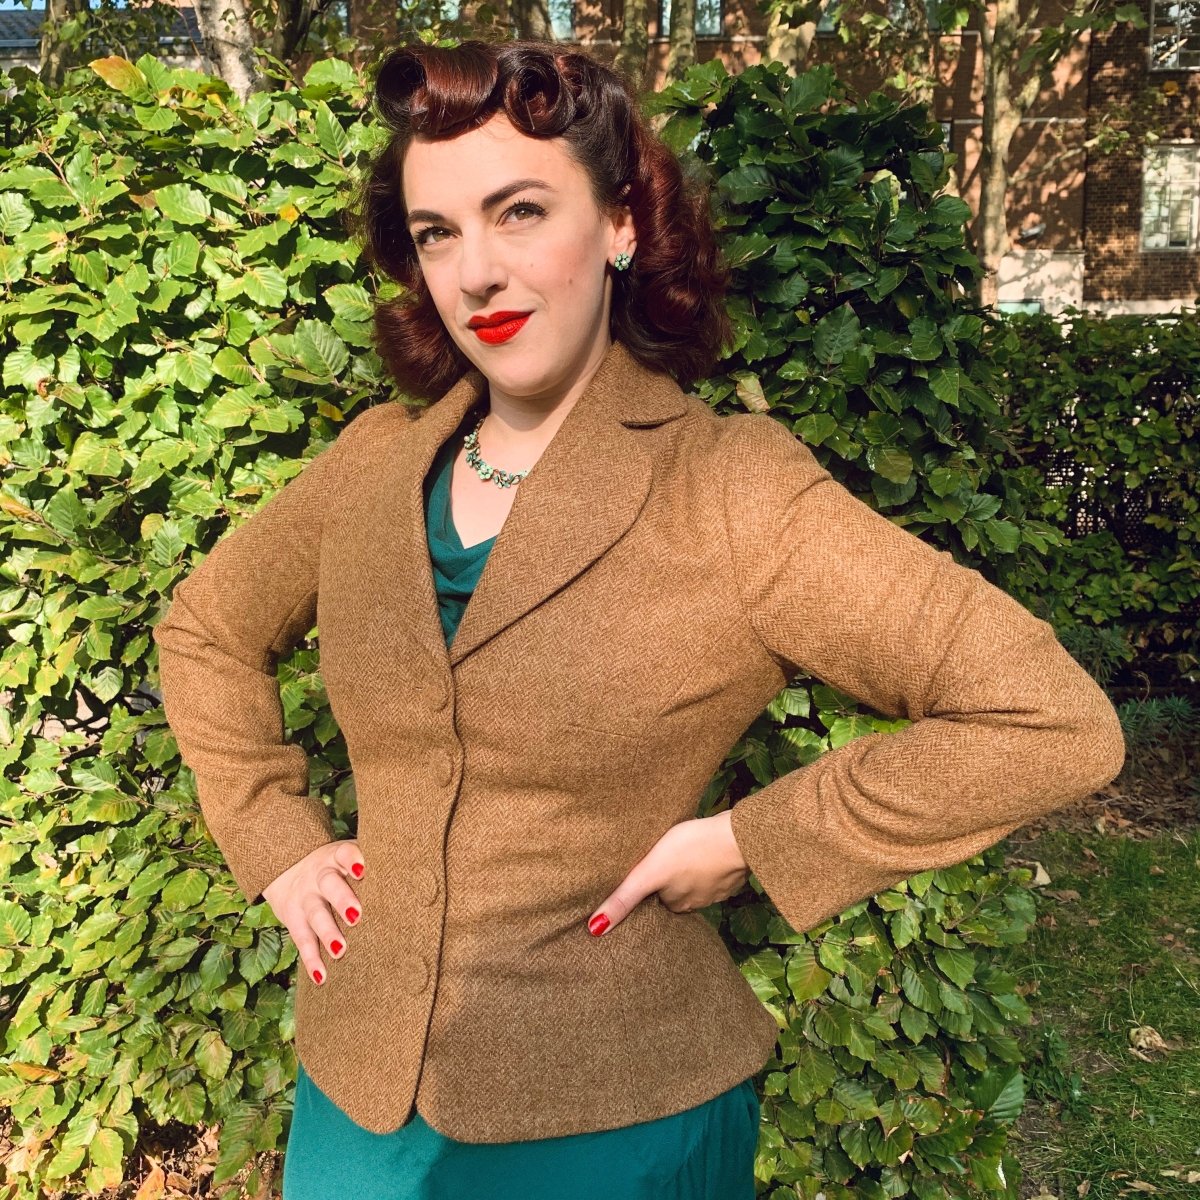 Suit jacket for curvy women, seen here worn over a green vintage style dress